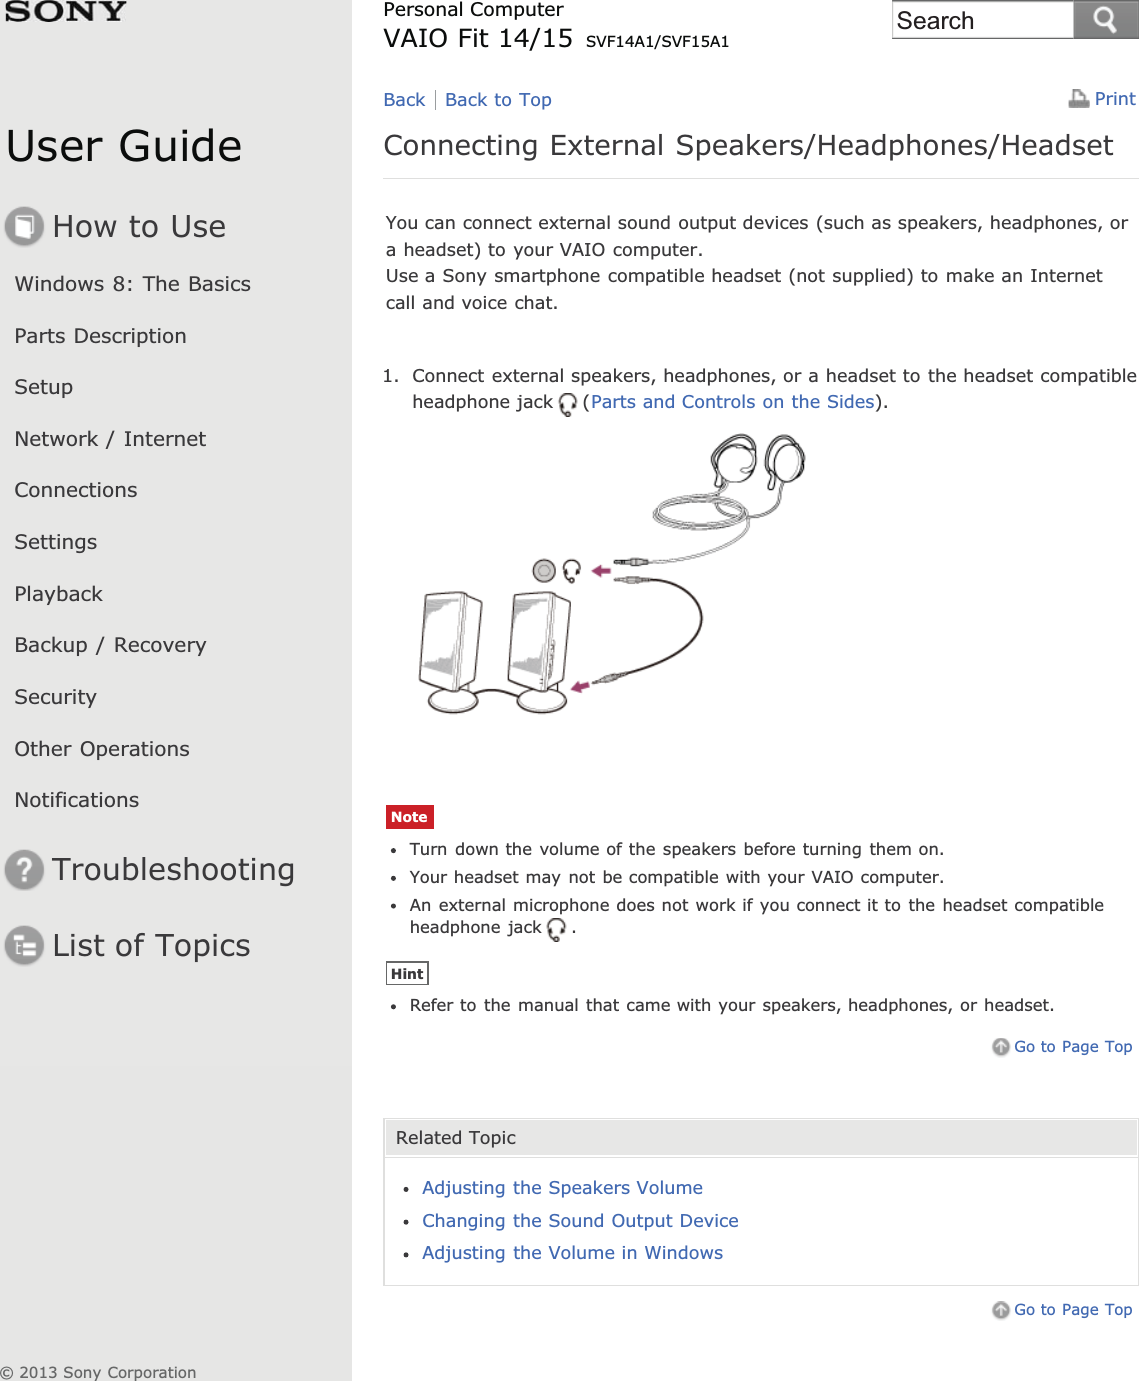 User GuideHow to UseWindows 8: The BasicsParts DescriptionSetupNetwork / InternetConnectionsSettingsPlaybackBackup / RecoverySecurityOther OperationsNotificationsTroubleshootingList of TopicsPrintPersonal ComputerVAIO Fit 14/15 SVF14A1/SVF15A1Connecting External Speakers/Headphones/HeadsetYou can connect external sound output devices (such as speakers, headphones, ora headset) to your VAIO computer.Use a Sony smartphone compatible headset (not supplied) to make an Internetcall and voice chat.1. Connect external speakers, headphones, or a headset to the headset compatibleheadphone jack (Parts and Controls on the Sides).NoteTurn down the volume of the speakers before turning them on.Your headset may not be compatible with your VAIO computer.An external microphone does not work if you connect it to the headset compatibleheadphone jack .HintRefer to the manual that came with your speakers, headphones, or headset.Go to Page TopRelated TopicAdjusting the Speakers VolumeChanging the Sound Output DeviceAdjusting the Volume in WindowsGo to Page TopBack Back to Top© 2013 Sony CorporationSearch